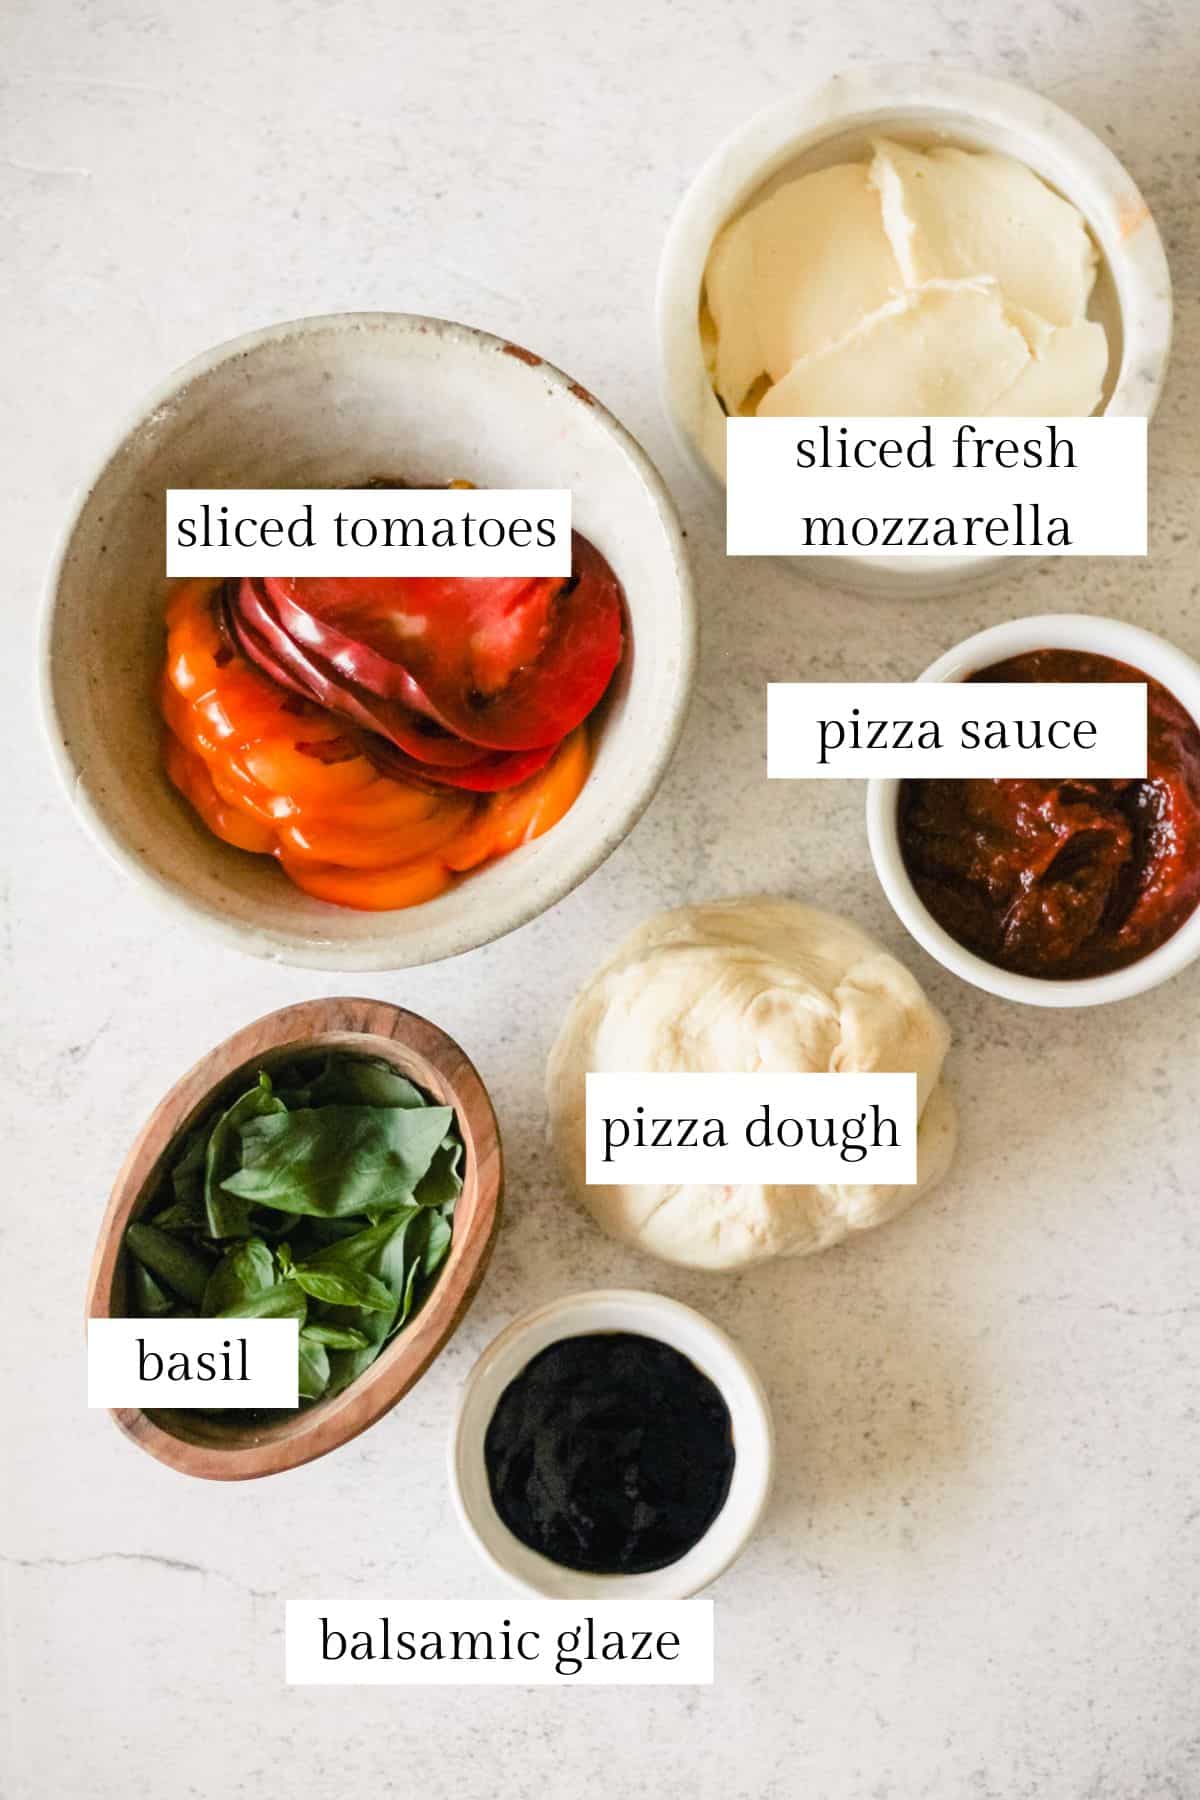 Labeled ingredients to make caprese pizza.